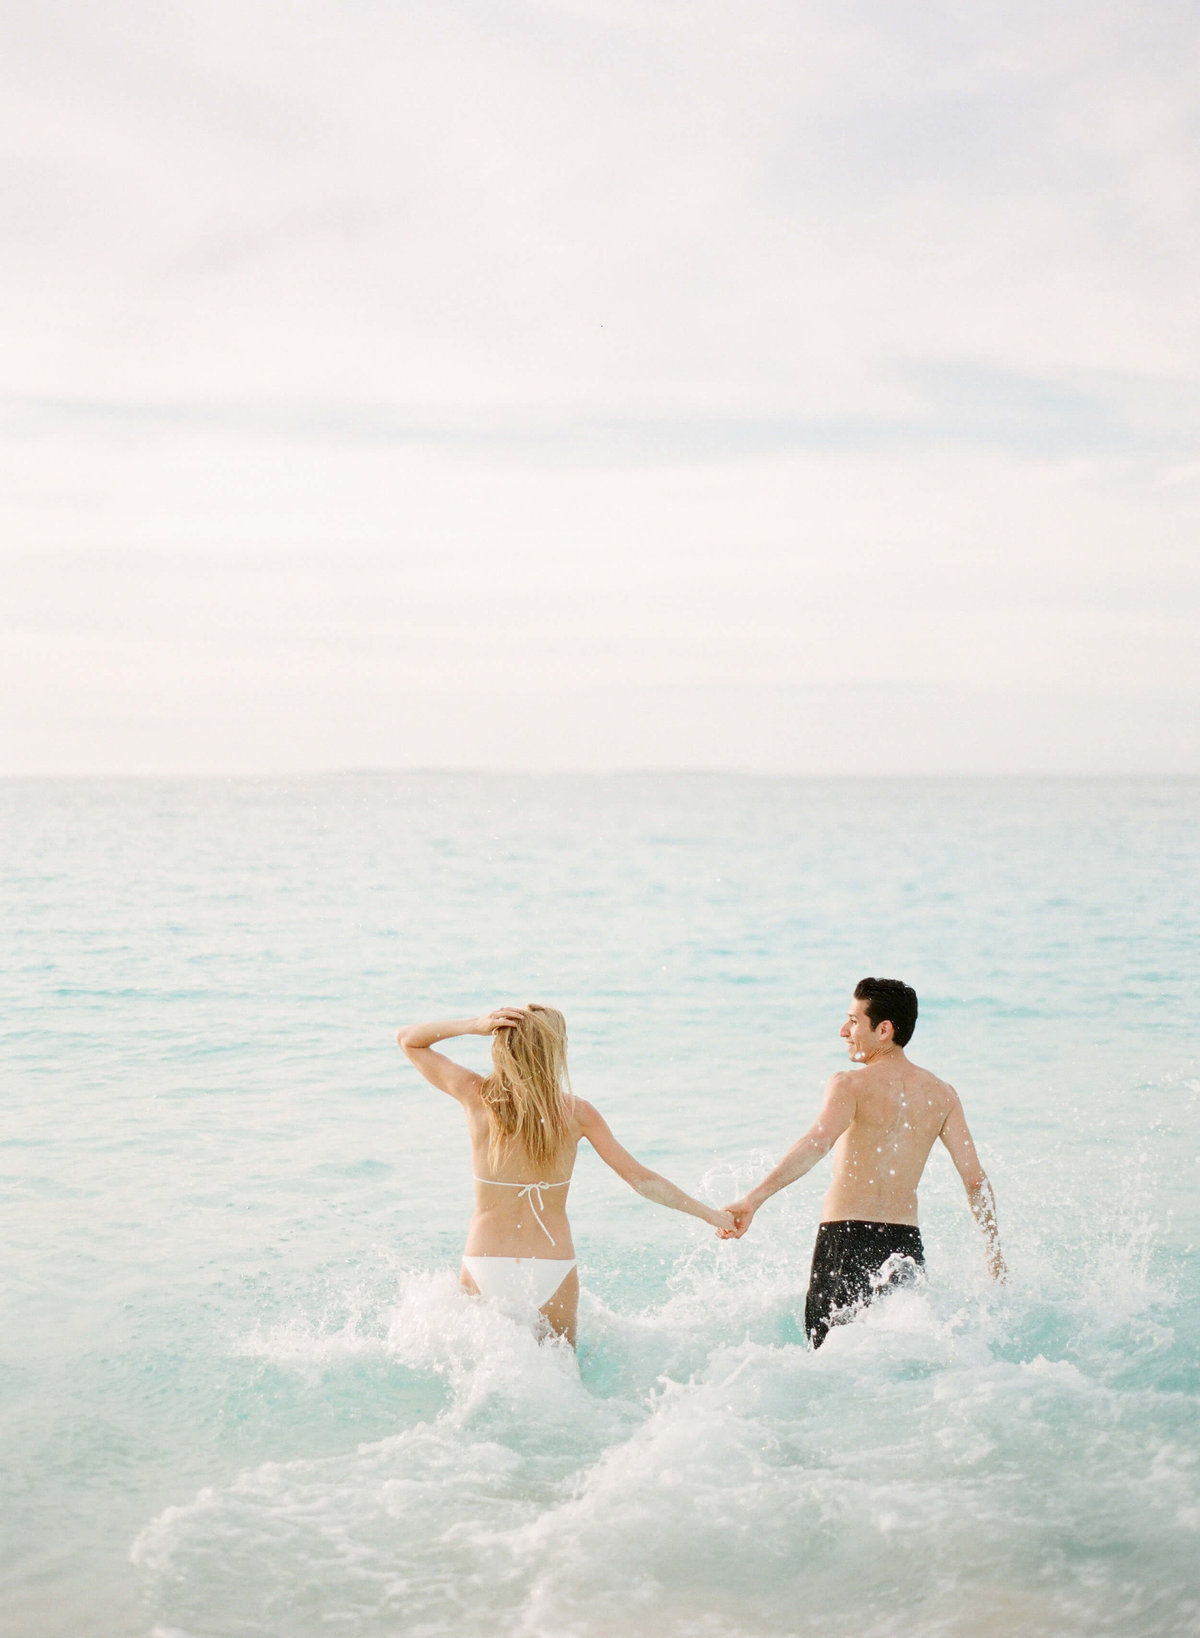 8-KTMerry-engagement-session-ocean-Anguilla